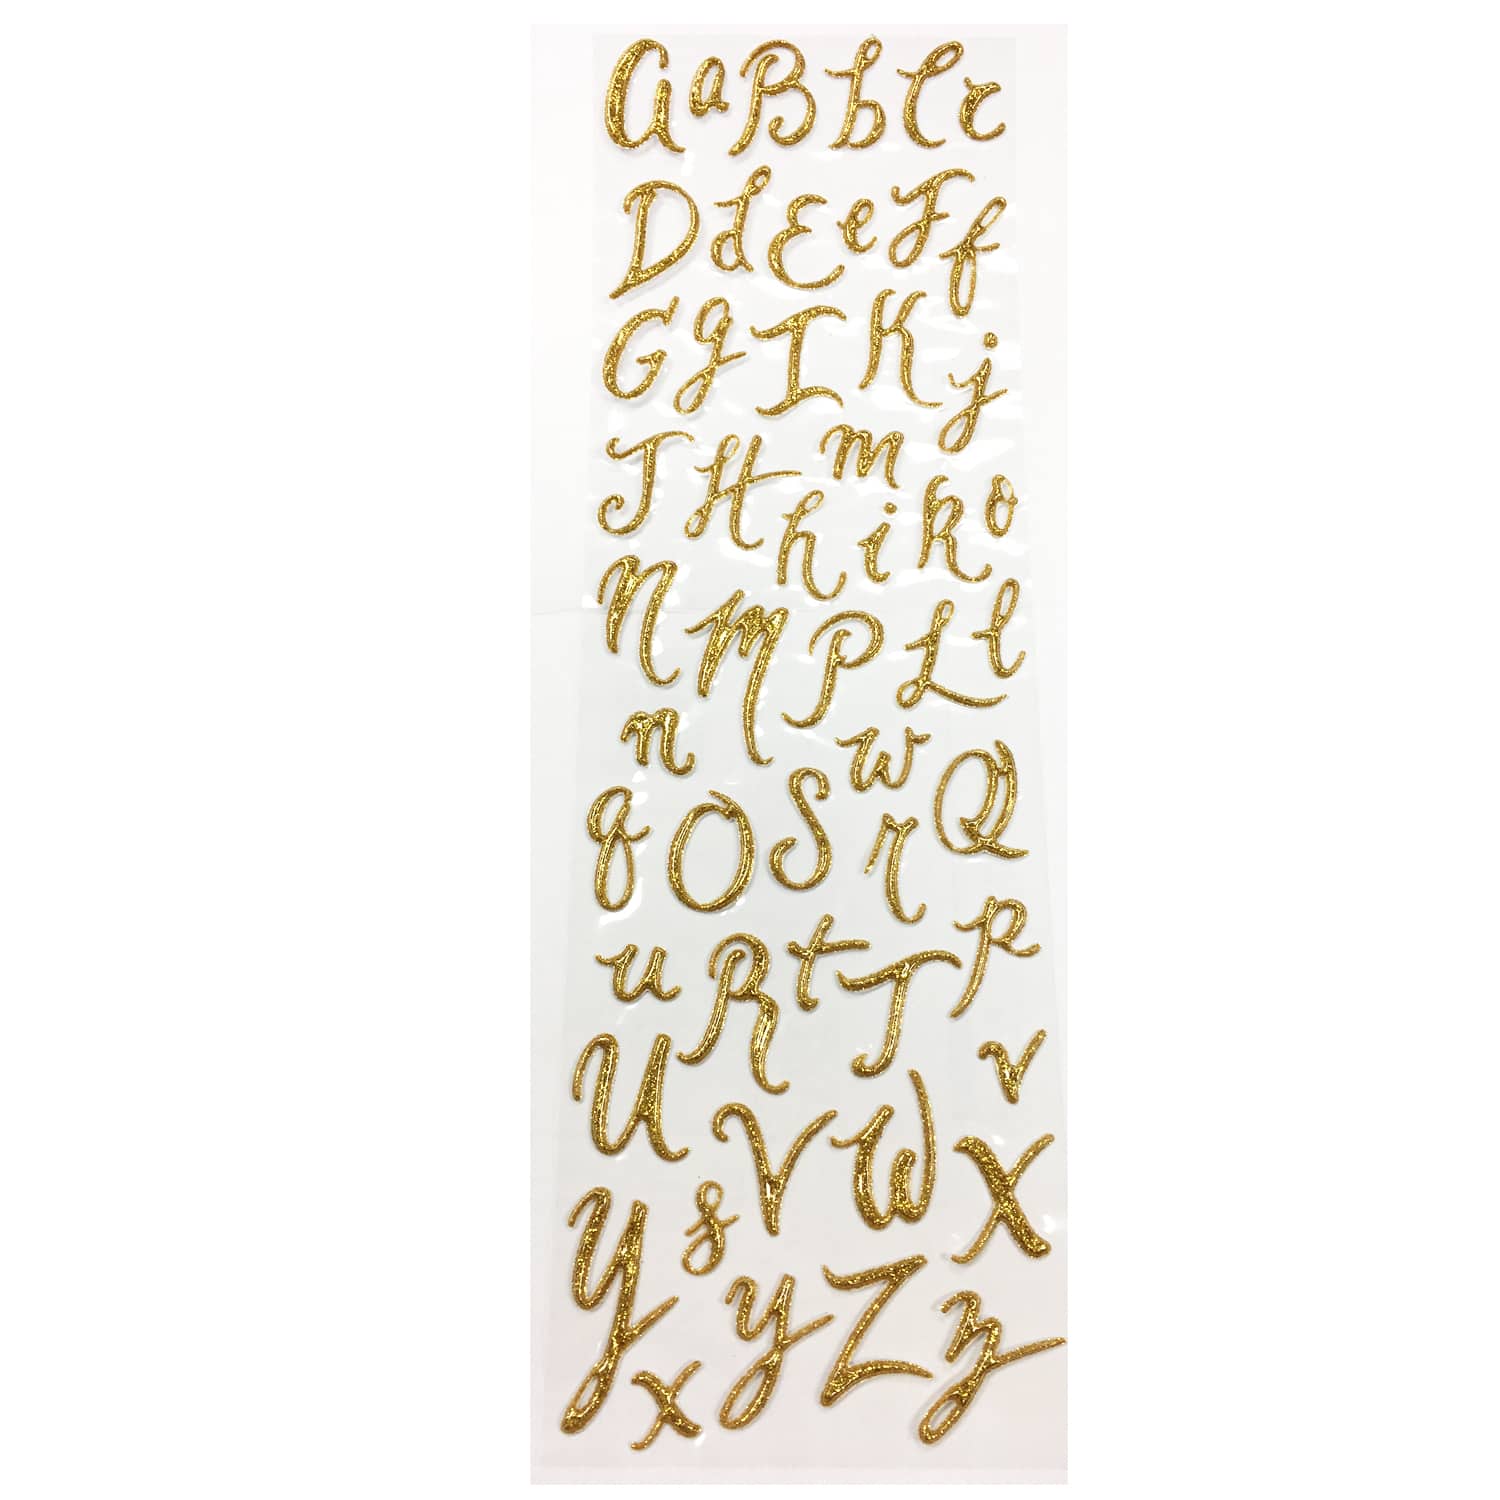 Crafter's Square Stickers LETTERS GOLD Glitter 70 Pieces NIP And Foil  letters